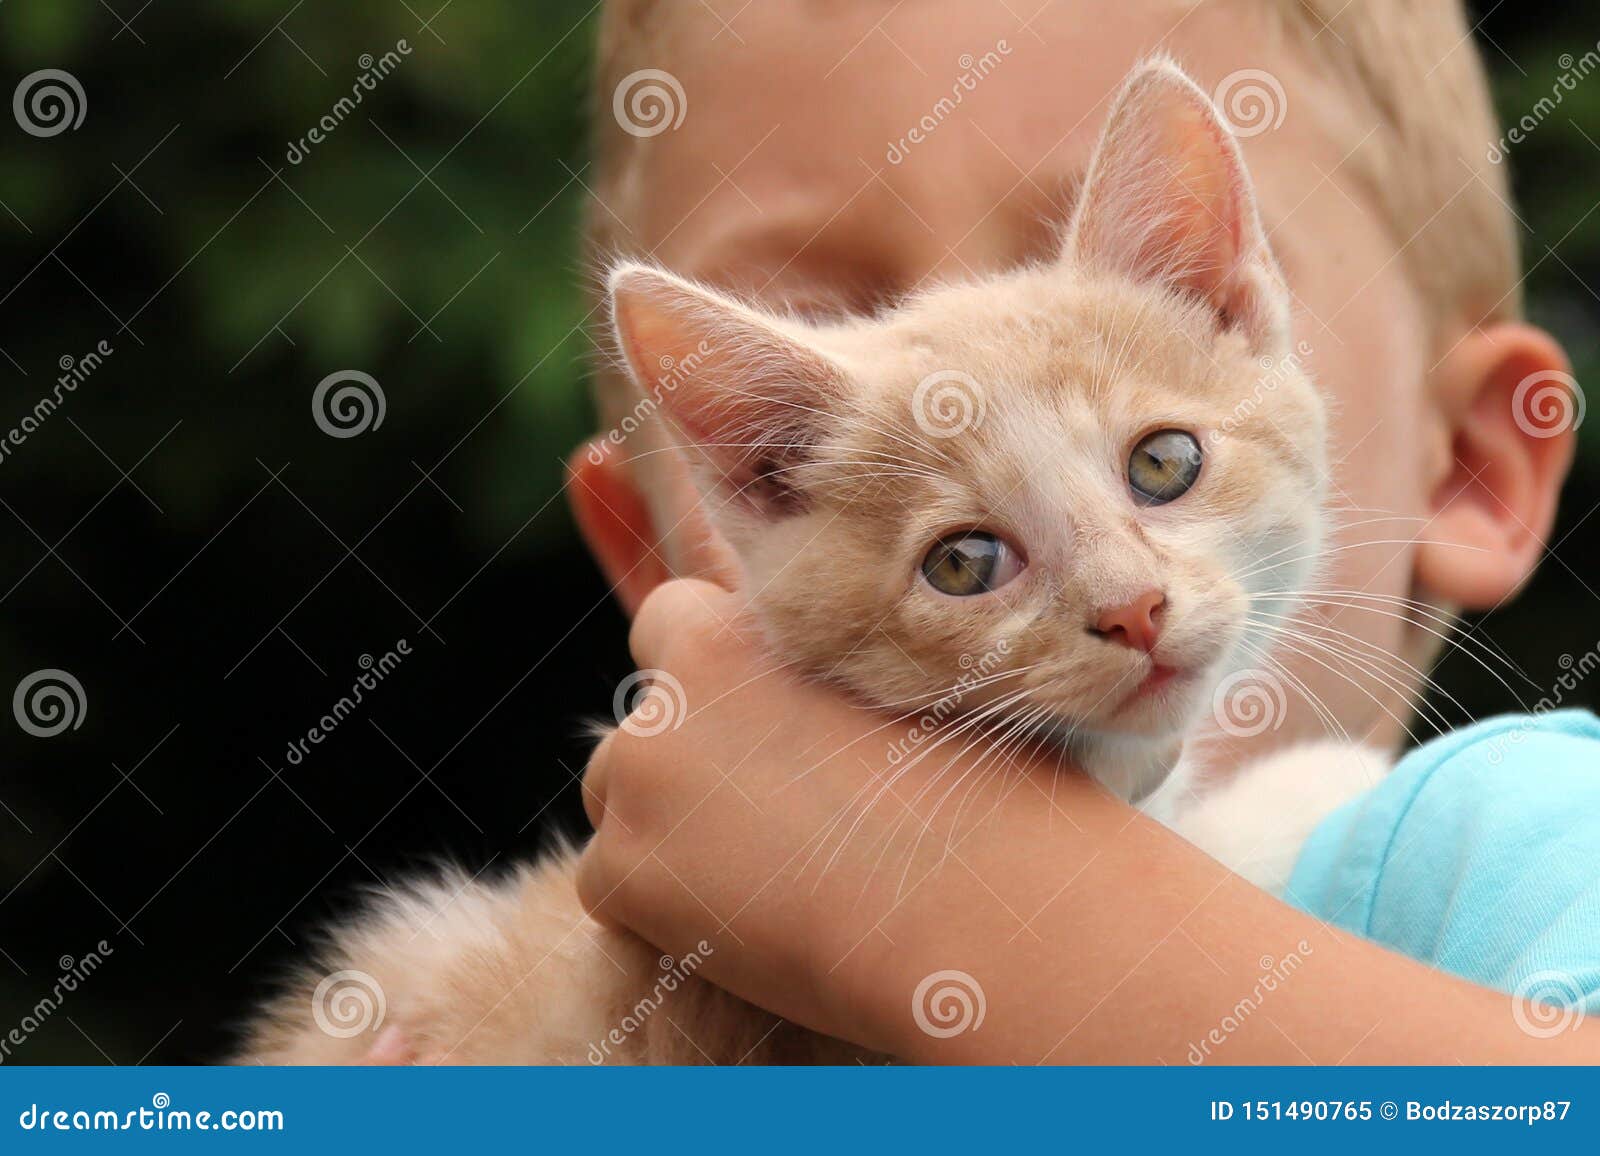 Cute Red Cat Stock Images - Download 58,961 Royalty Free Photos